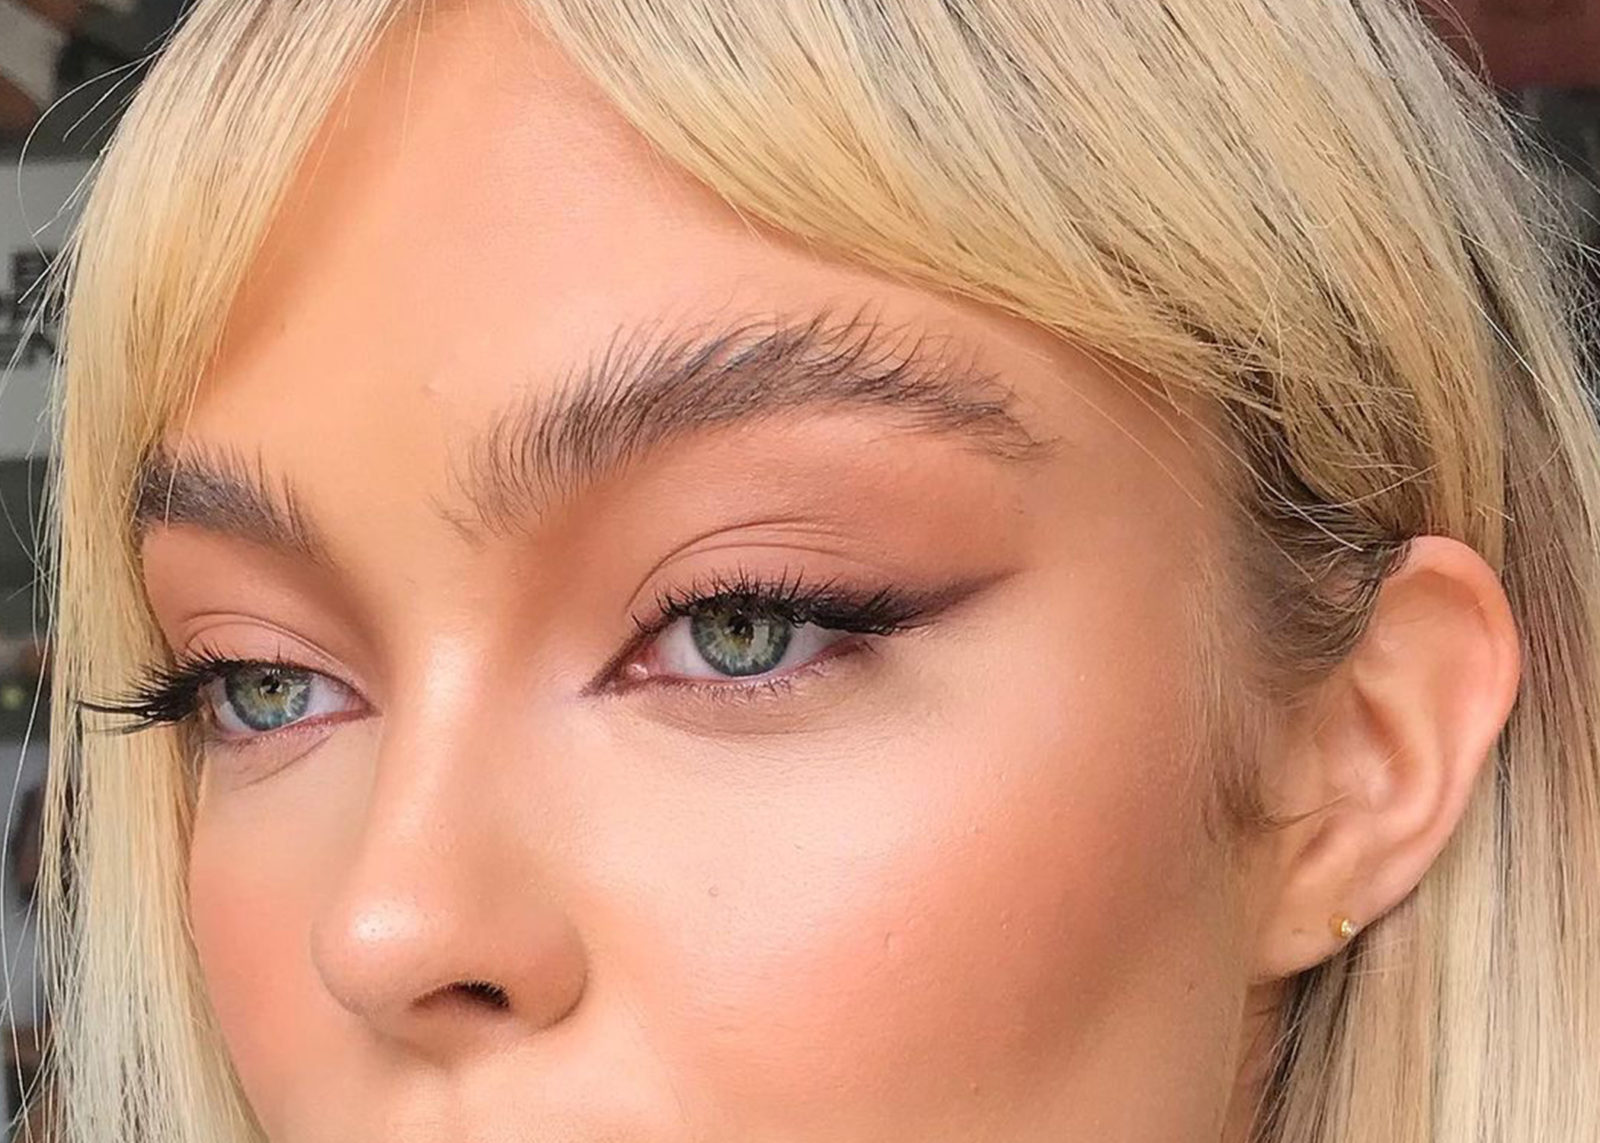 These popular eyebrow trends we're going to see everywhere in 2022